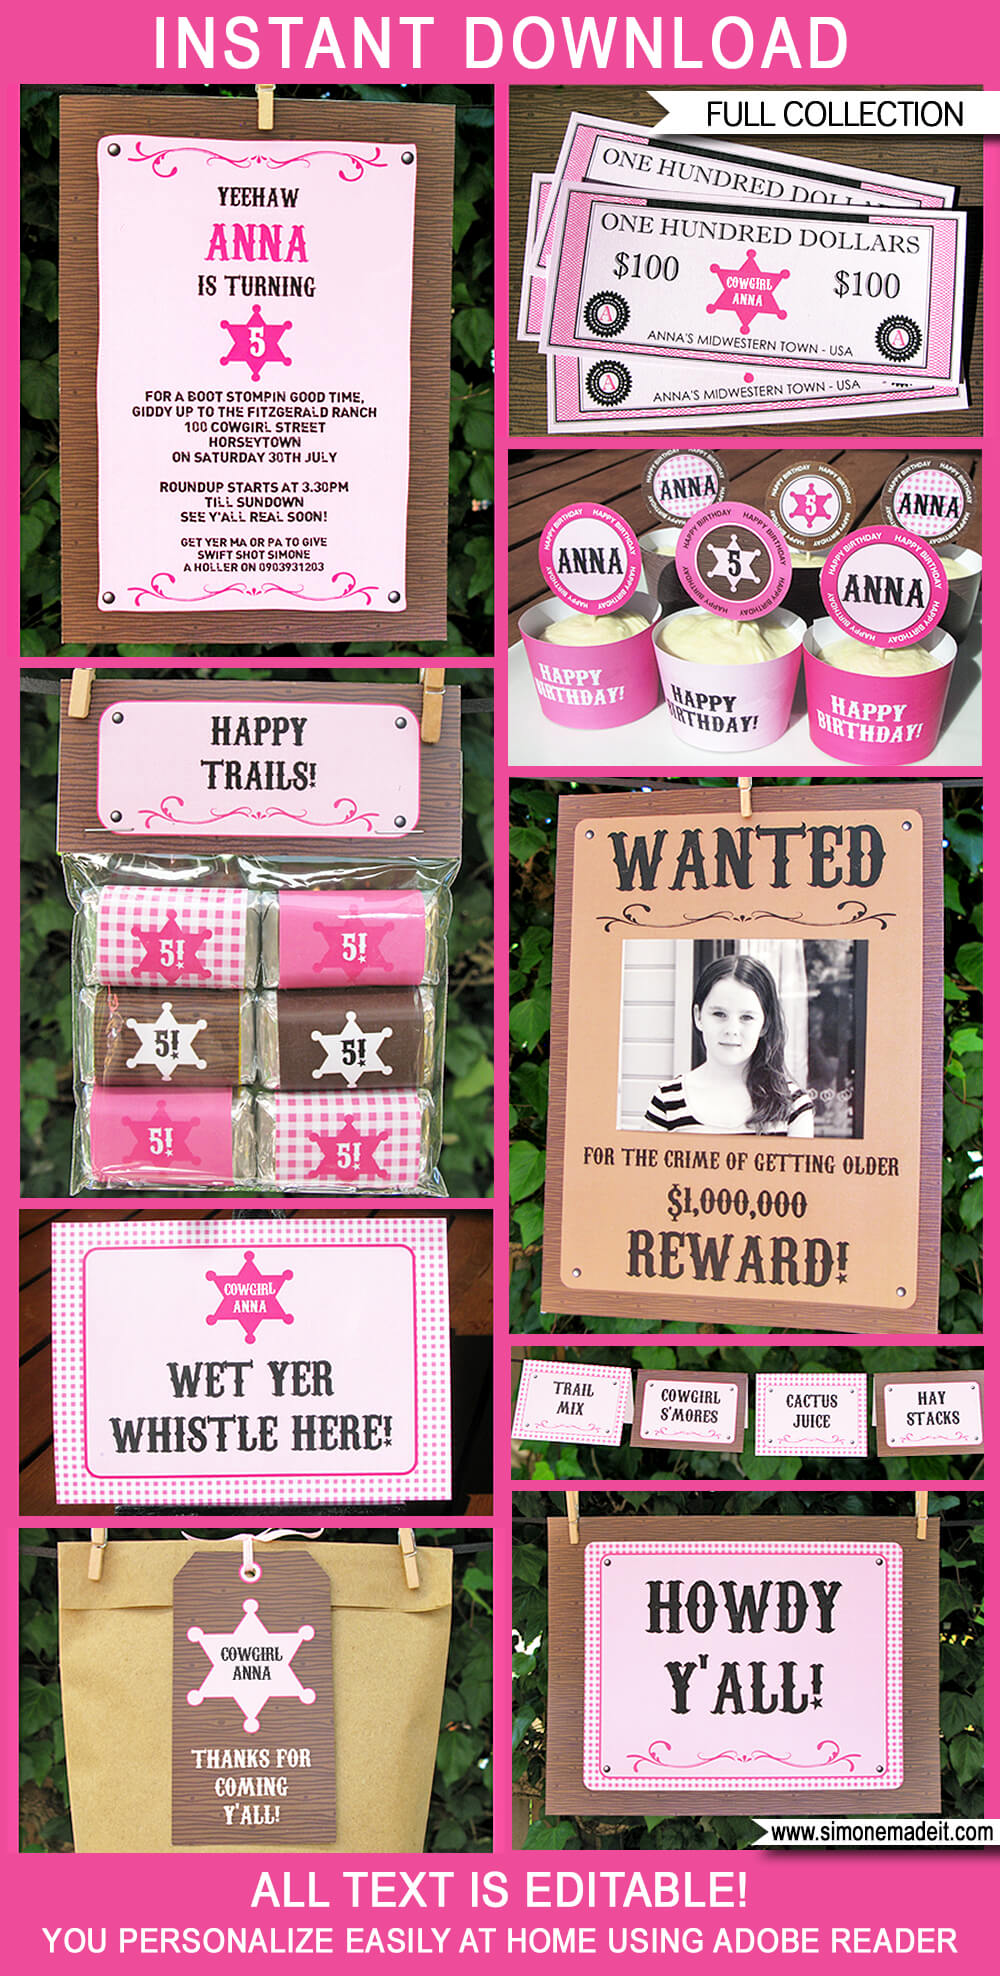 Cowgirl Party Printables, Invitations & Decorations | Birthday Party | Editable Theme Templates | INSTANT DOWNLOAD $12.50 via SIMONEmadeit.com